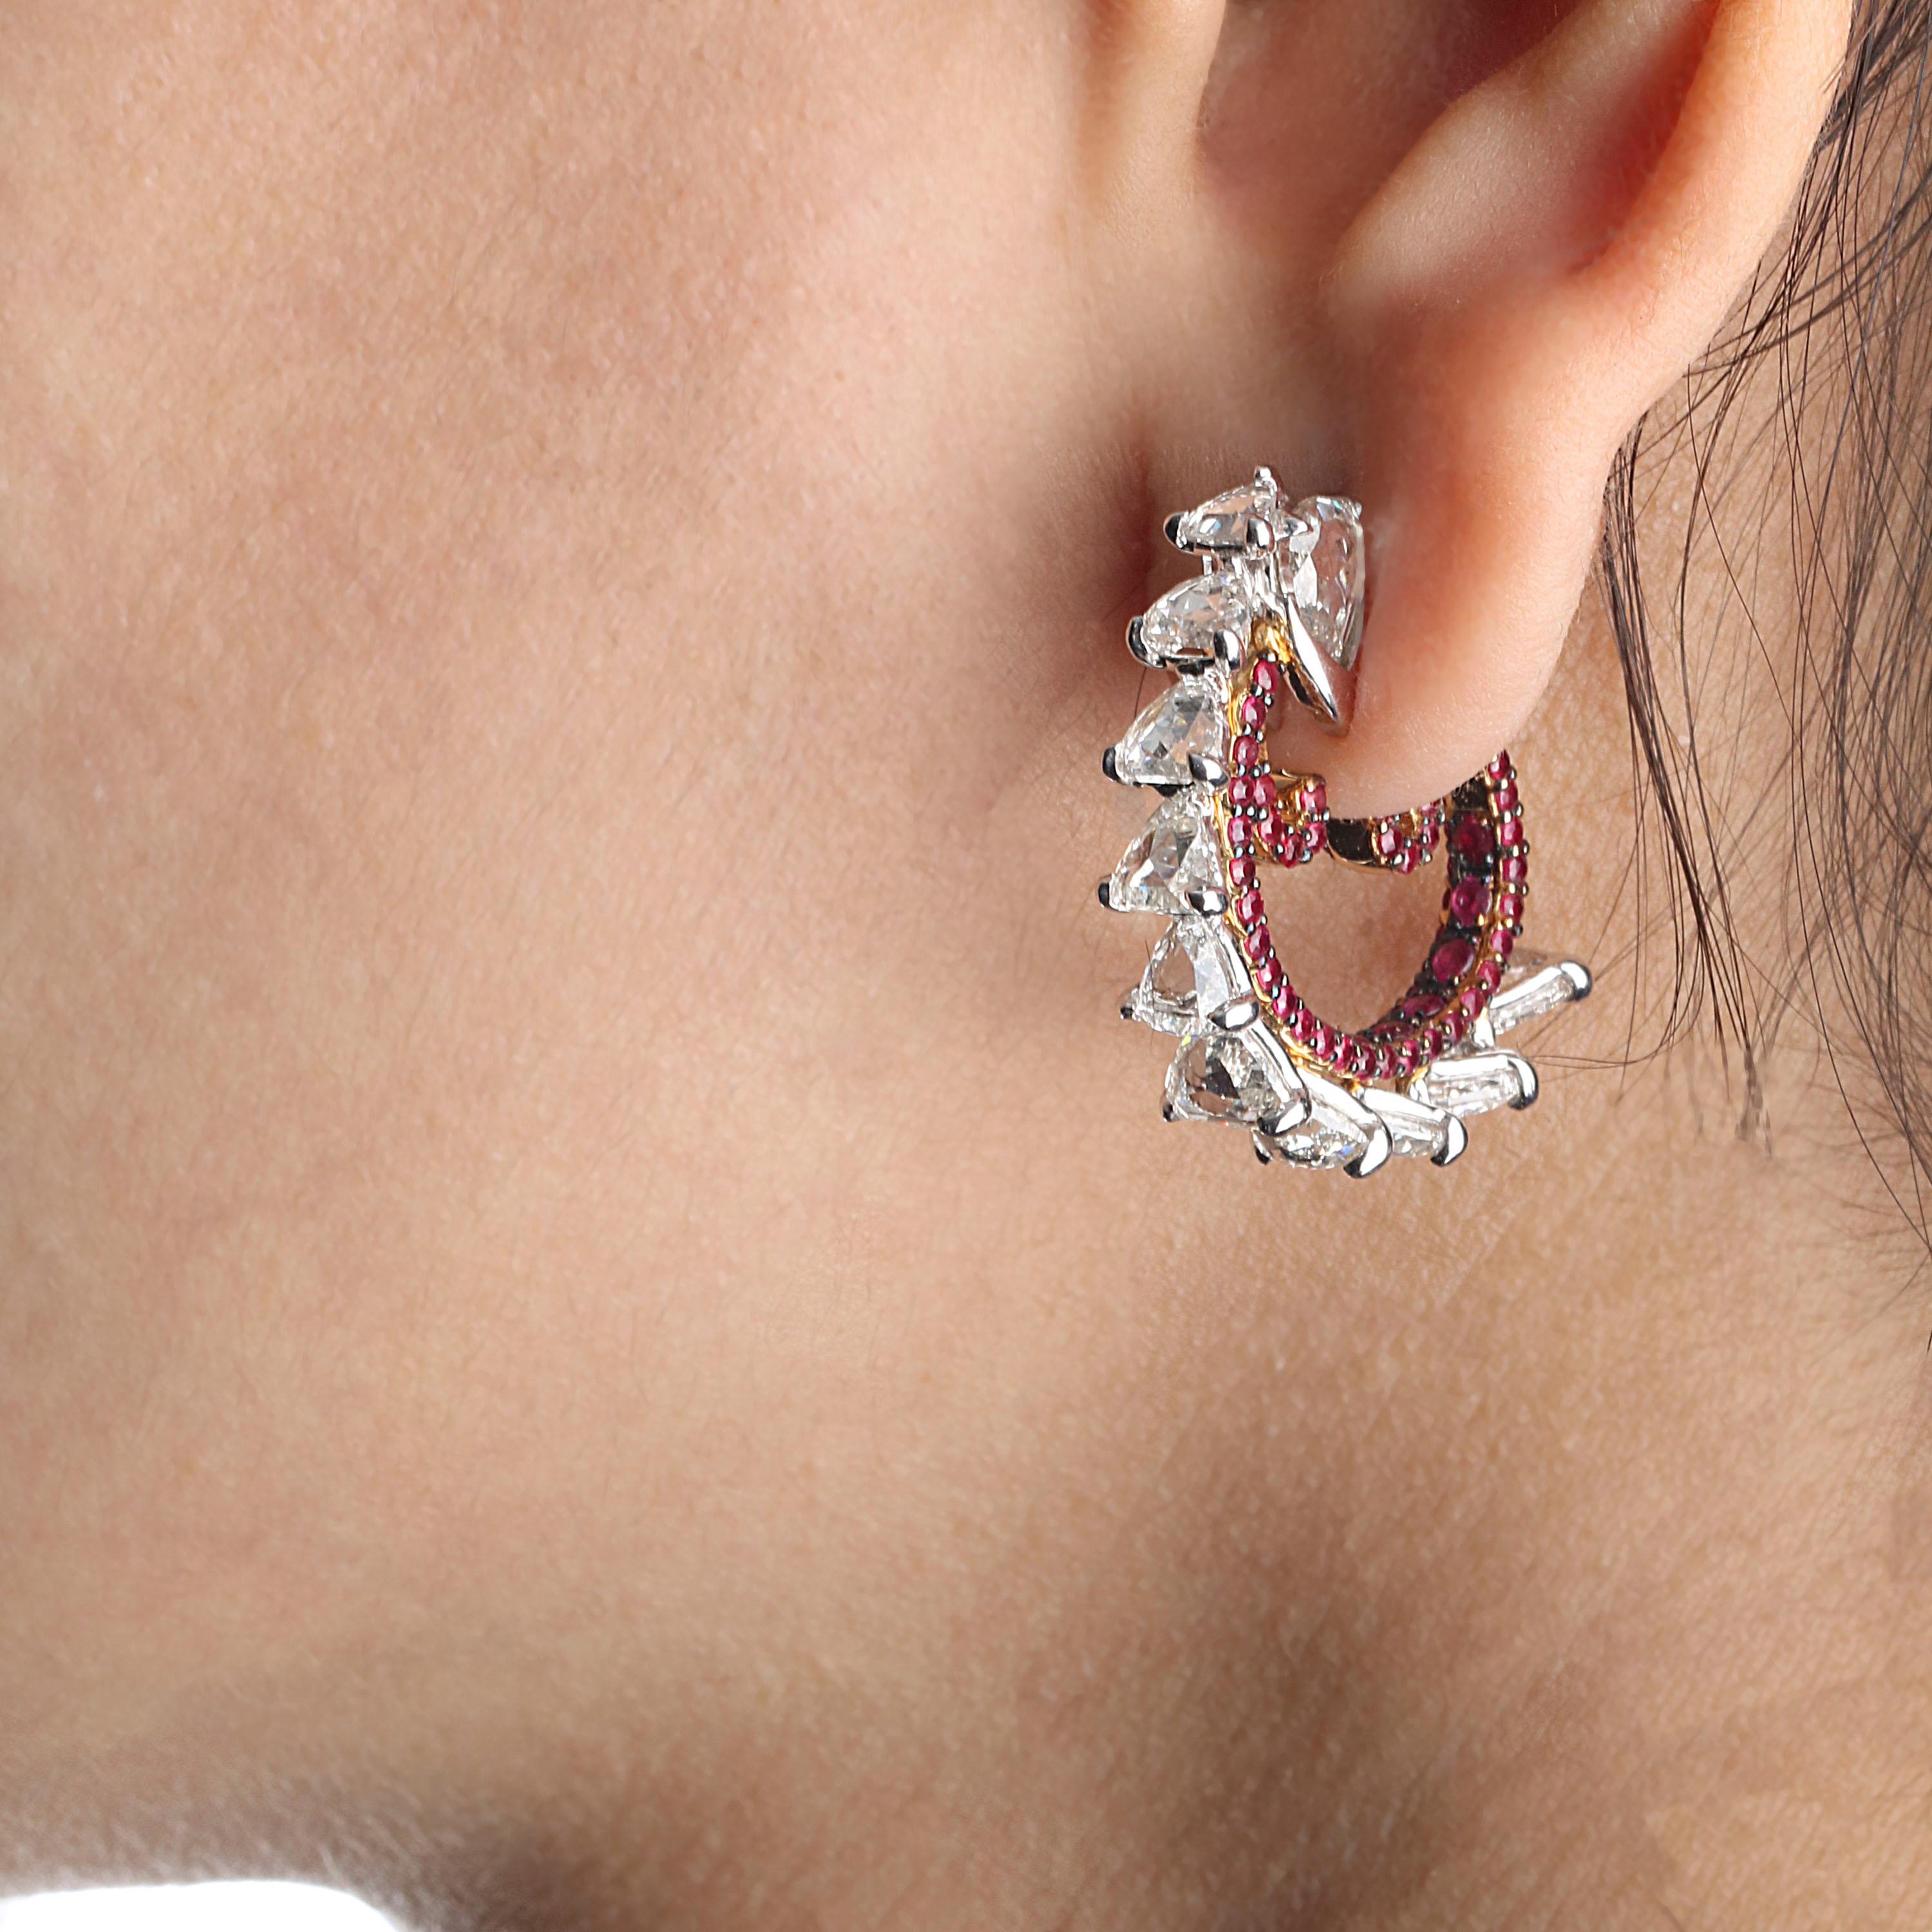 Contemporary Studio Rêves Diamond and Ruby Studded Curled Hoop Earrings in 18 Karat Gold For Sale